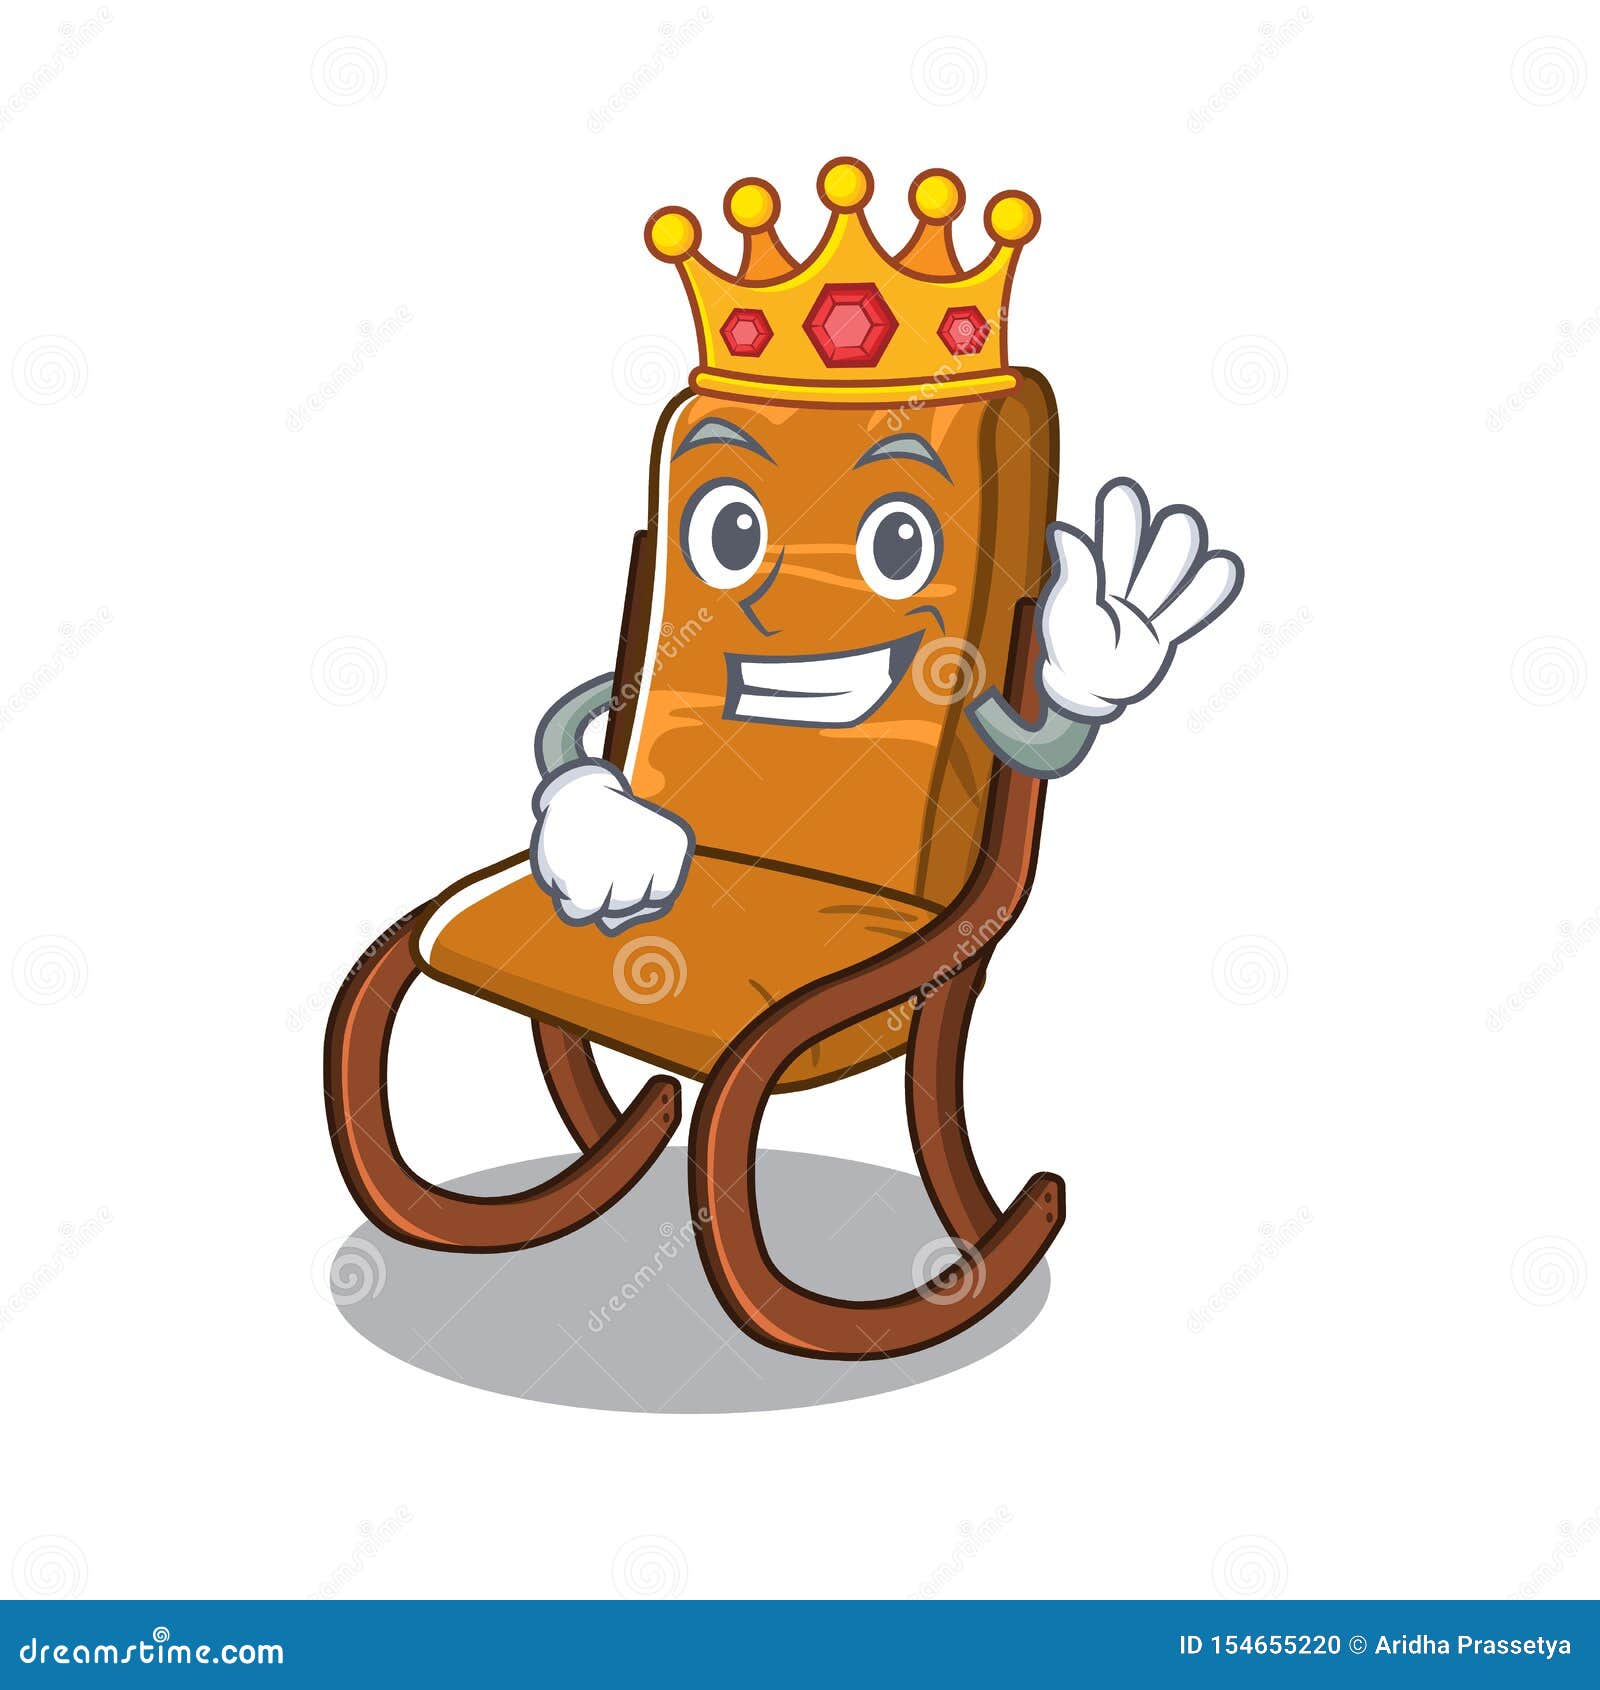 King Toy Rocking Chair Above Cartoon Table Stock Vector - Illustration of  leisure, mascot: 154655220